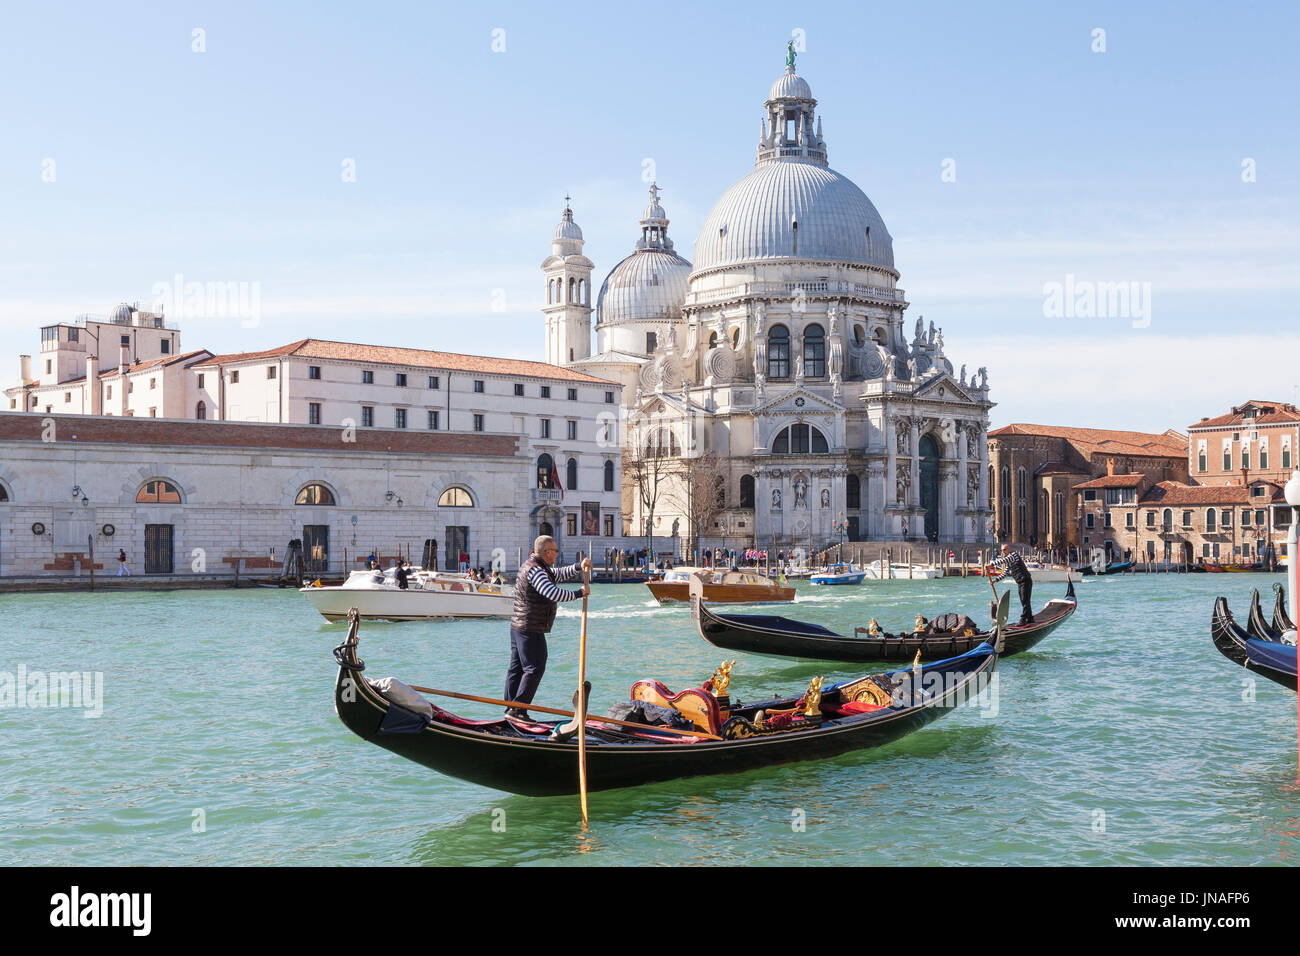 March 2017 Grand Canal, Venice, Italy. Two gondoliers rowing their gondolas past the Basilica Santa Maria della Salute with water taxis cruising by on Stock Photo